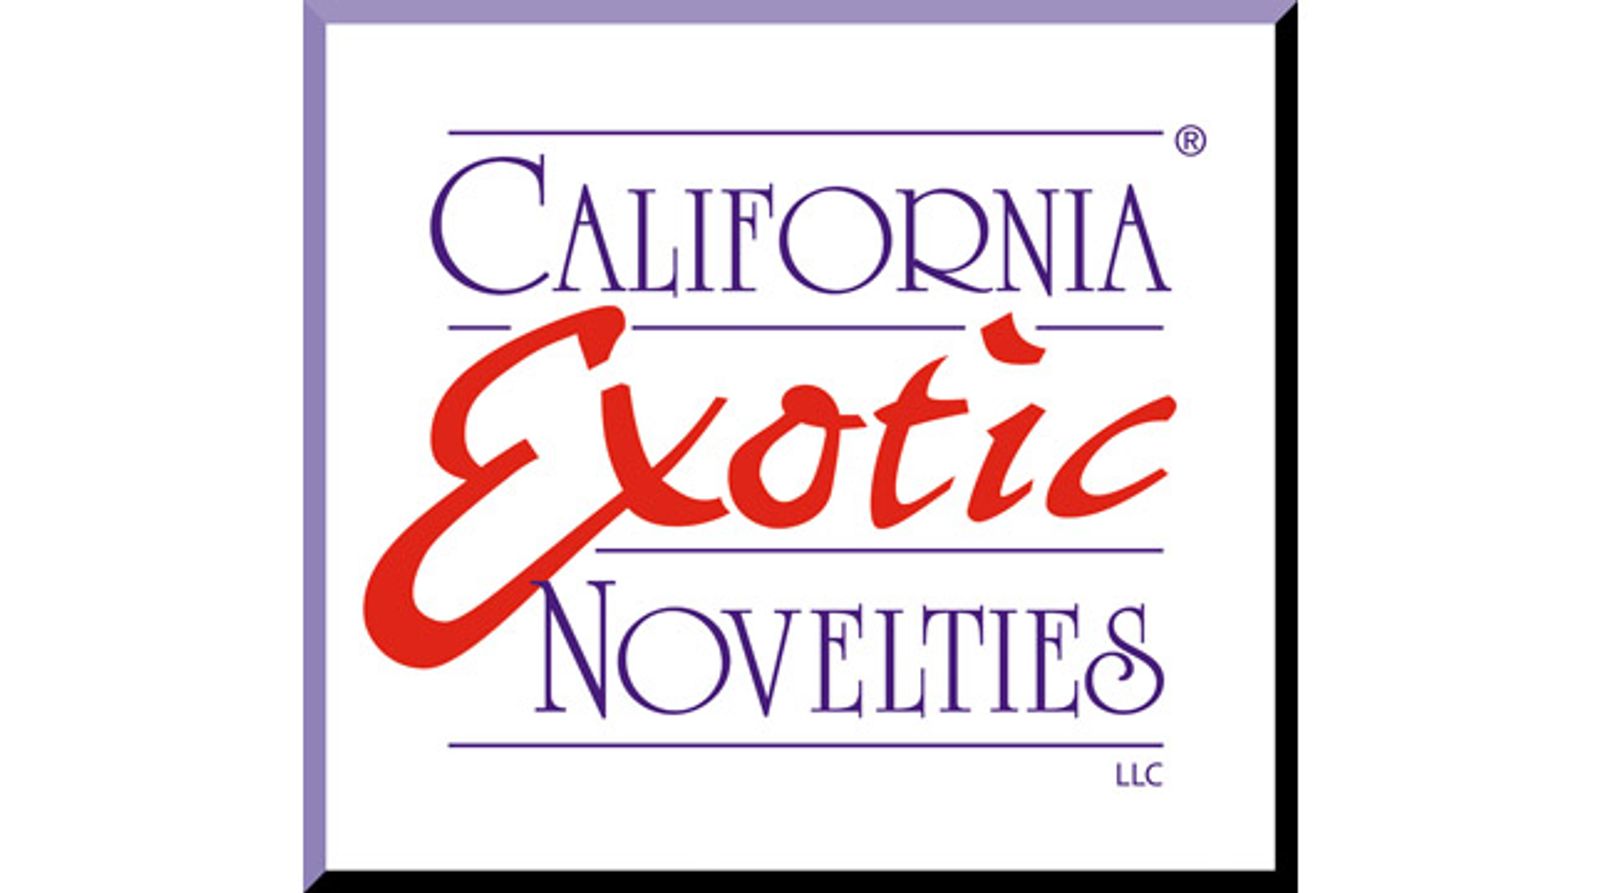 Cal Exotics’ Butterfly Kiss Gets Cosmo Mention